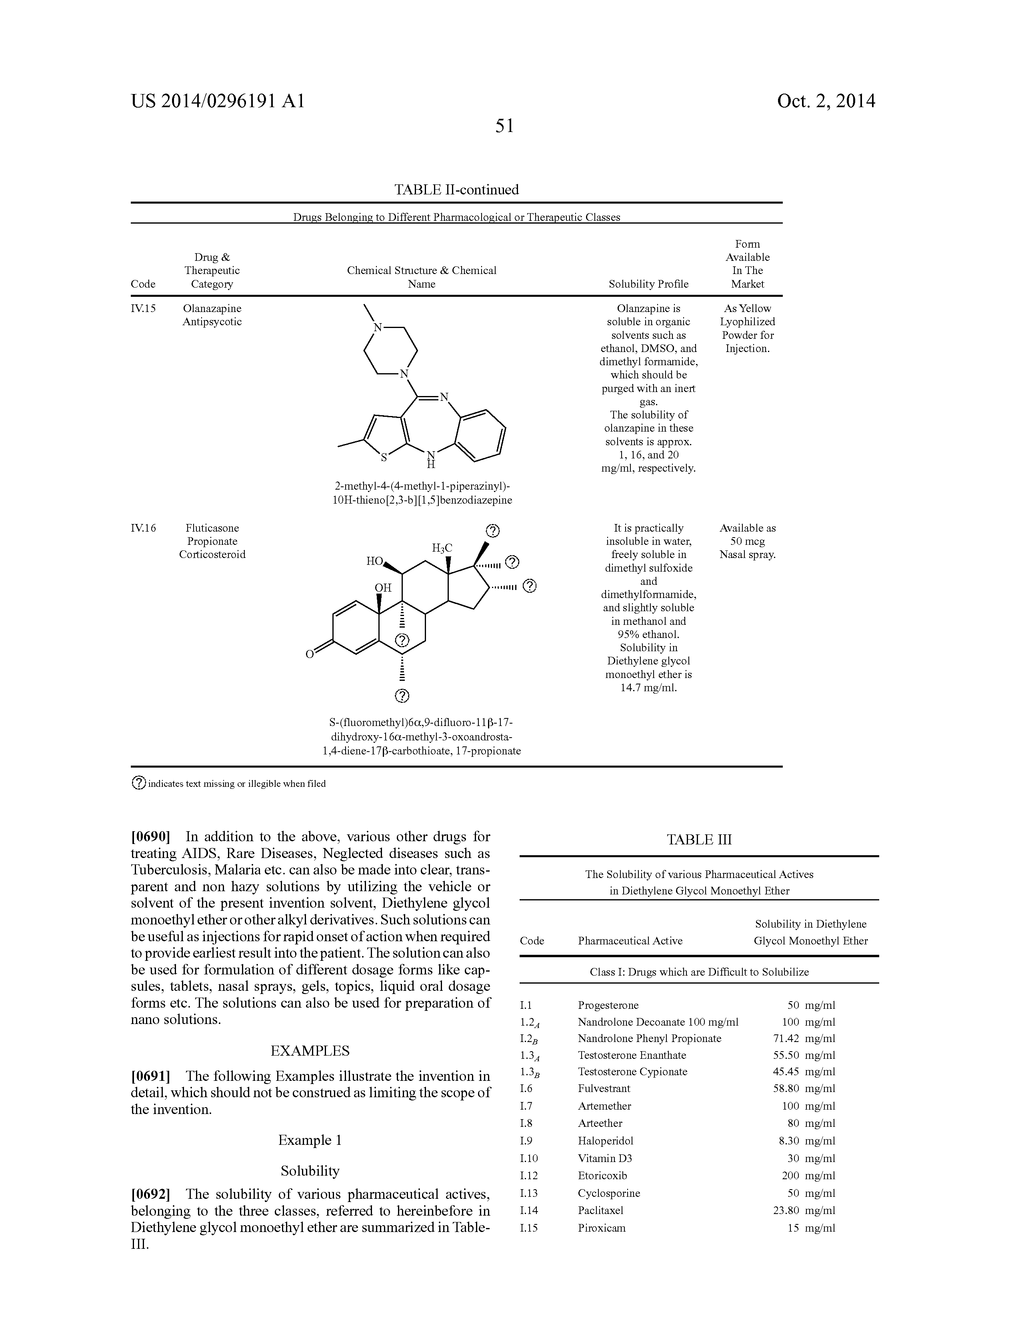 COMPOSITIONS OF PHARMACEUTICAL ACTIVES CONTAINING DIETHYLENE GLYCOL     MONOETHYL ETHER OR OTHER ALKYL DERIVATIVES - diagram, schematic, and image 53